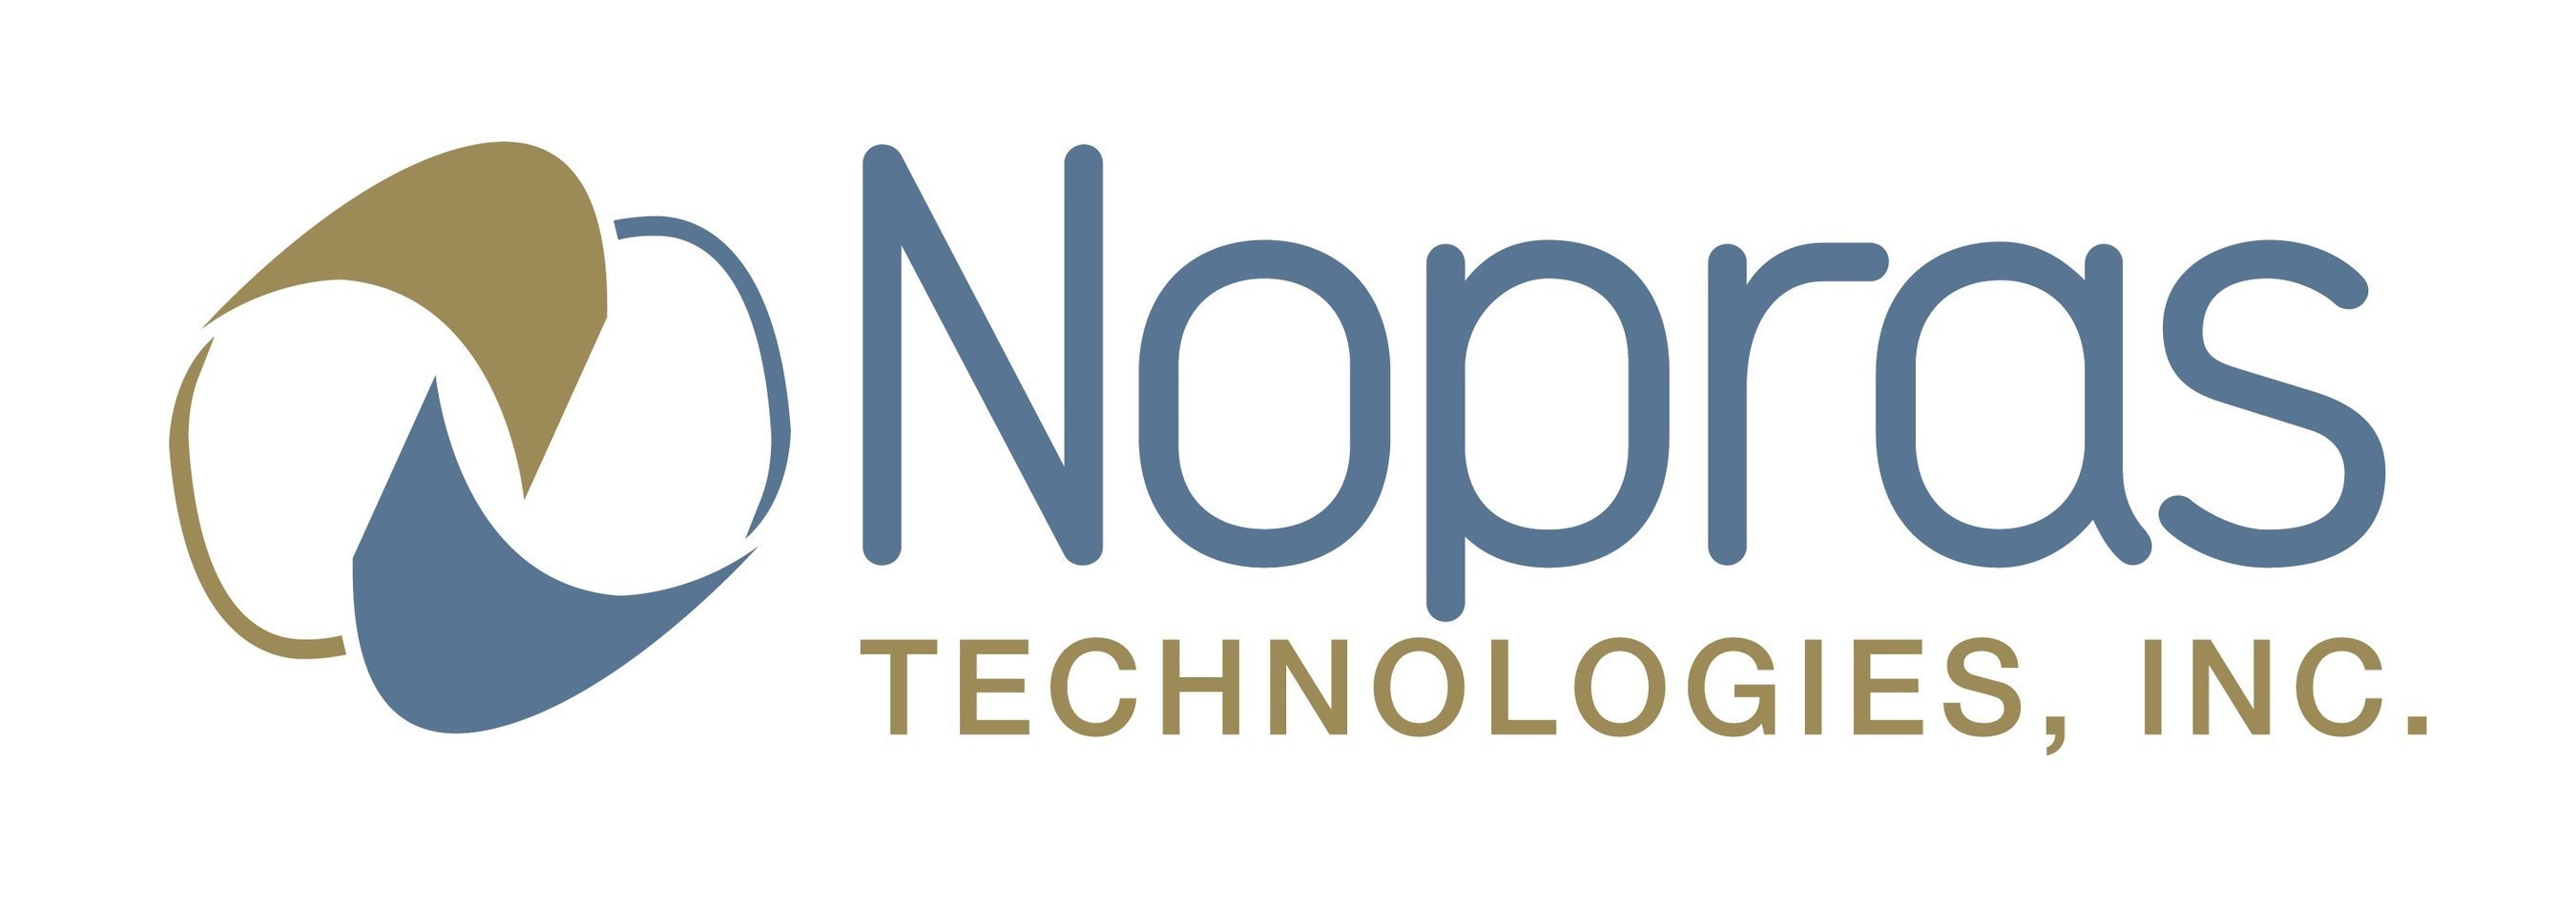 Nopras Technologies, Inc. is a global management consulting firm which specializes in CRO services to organizations in the pharmaceutical, biotechnology and biologics industries, as well as the medical device and diagnostics' sectors.   With core competencies in the life sciences' technical services, process and organizational excellence, regulatory compliance, quality management, and product development, Nopras Technologies draws heavily upon the expertise and skills of uniquely qualified former FDA key personnel providing a tailored differentiation to Nopras' operations and requests for services.  Nopras Technologies has its headquarters in Novi, MI US and additional offices in Fort Washington, PA US; Singapore; and Shanghai.